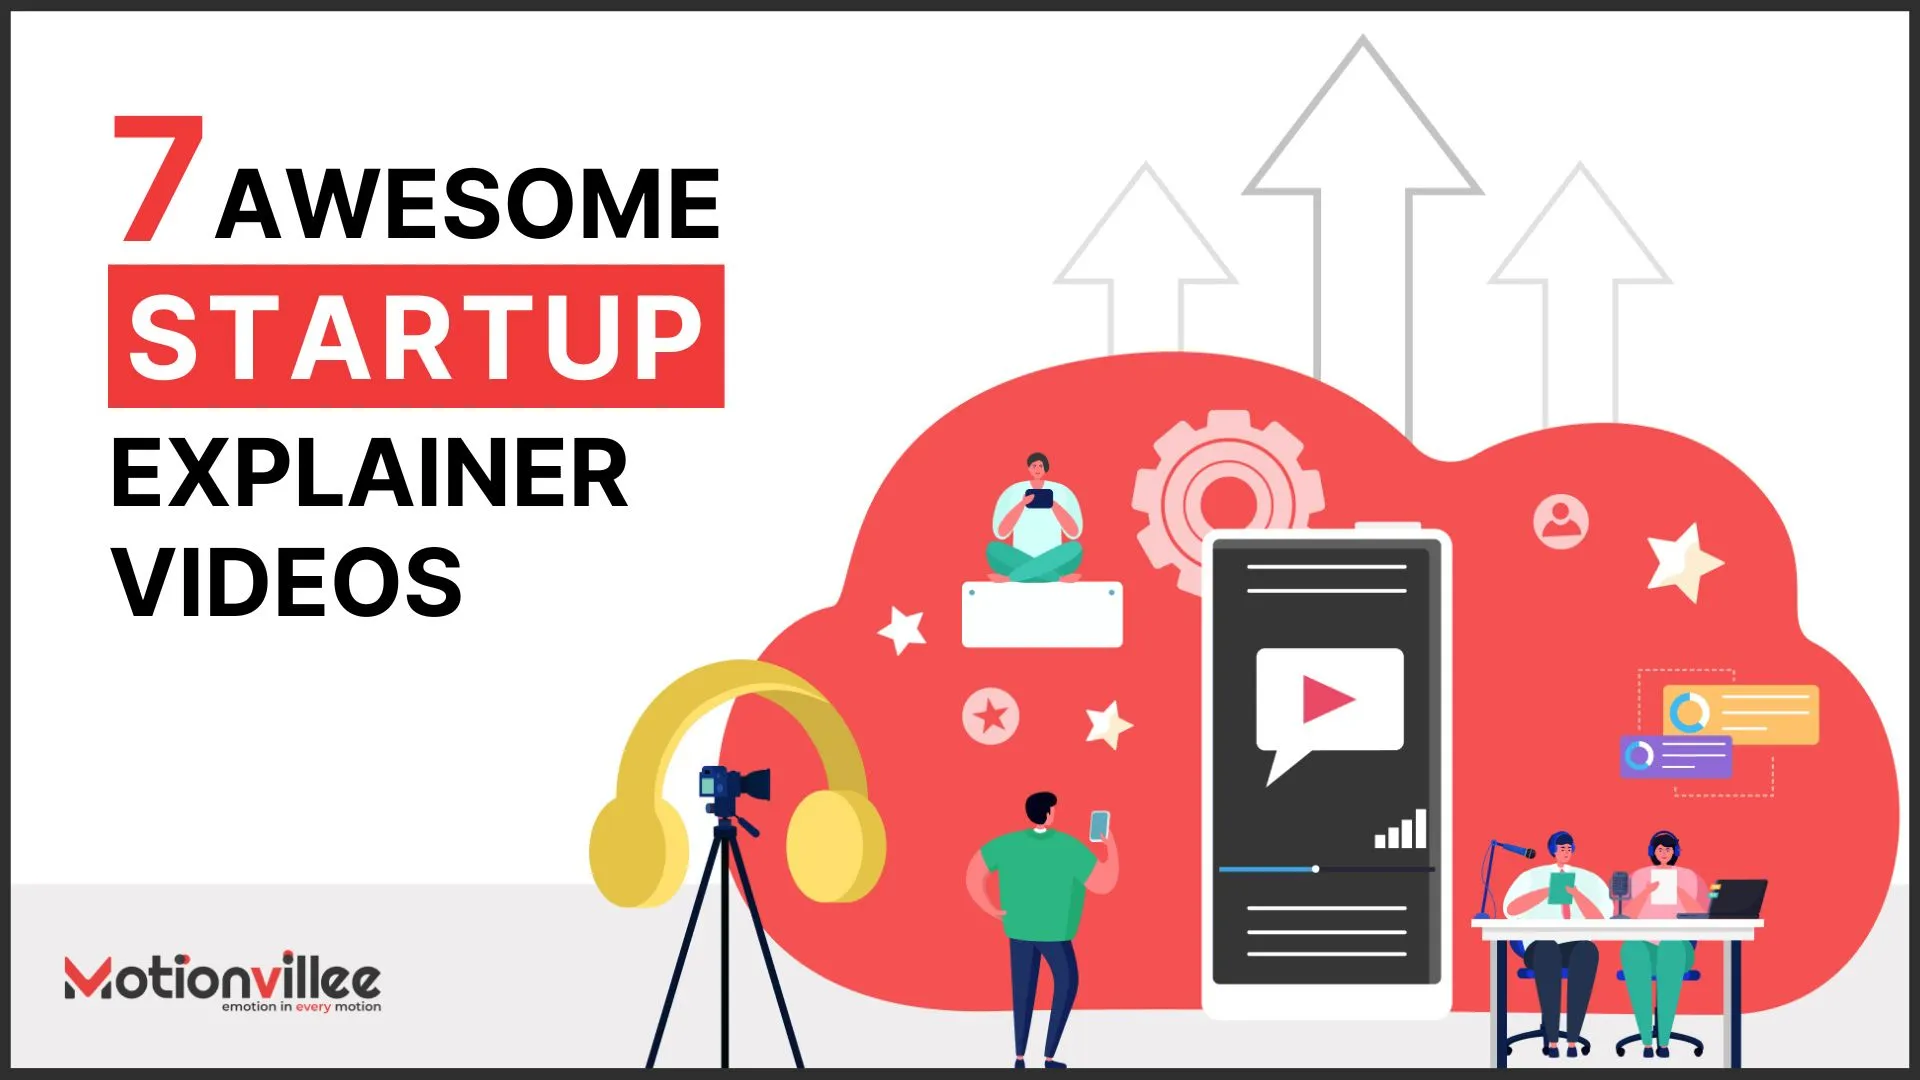 7 Awesome Startup Explainer Videos